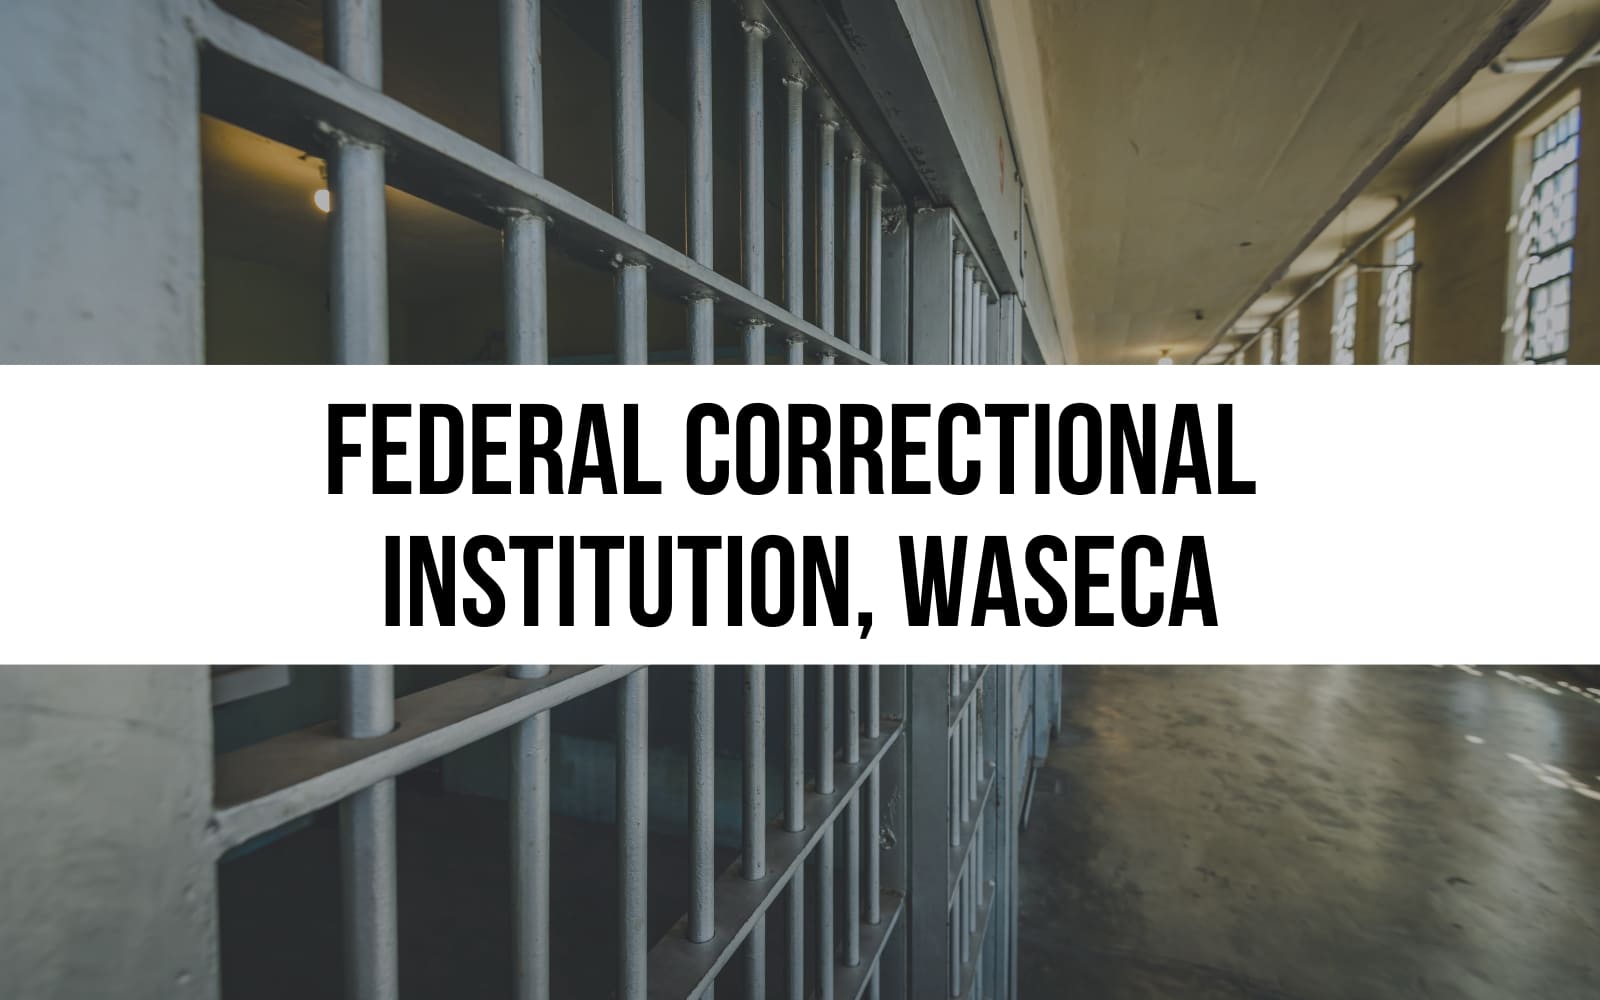 Federal Correctional Institution, Waseca